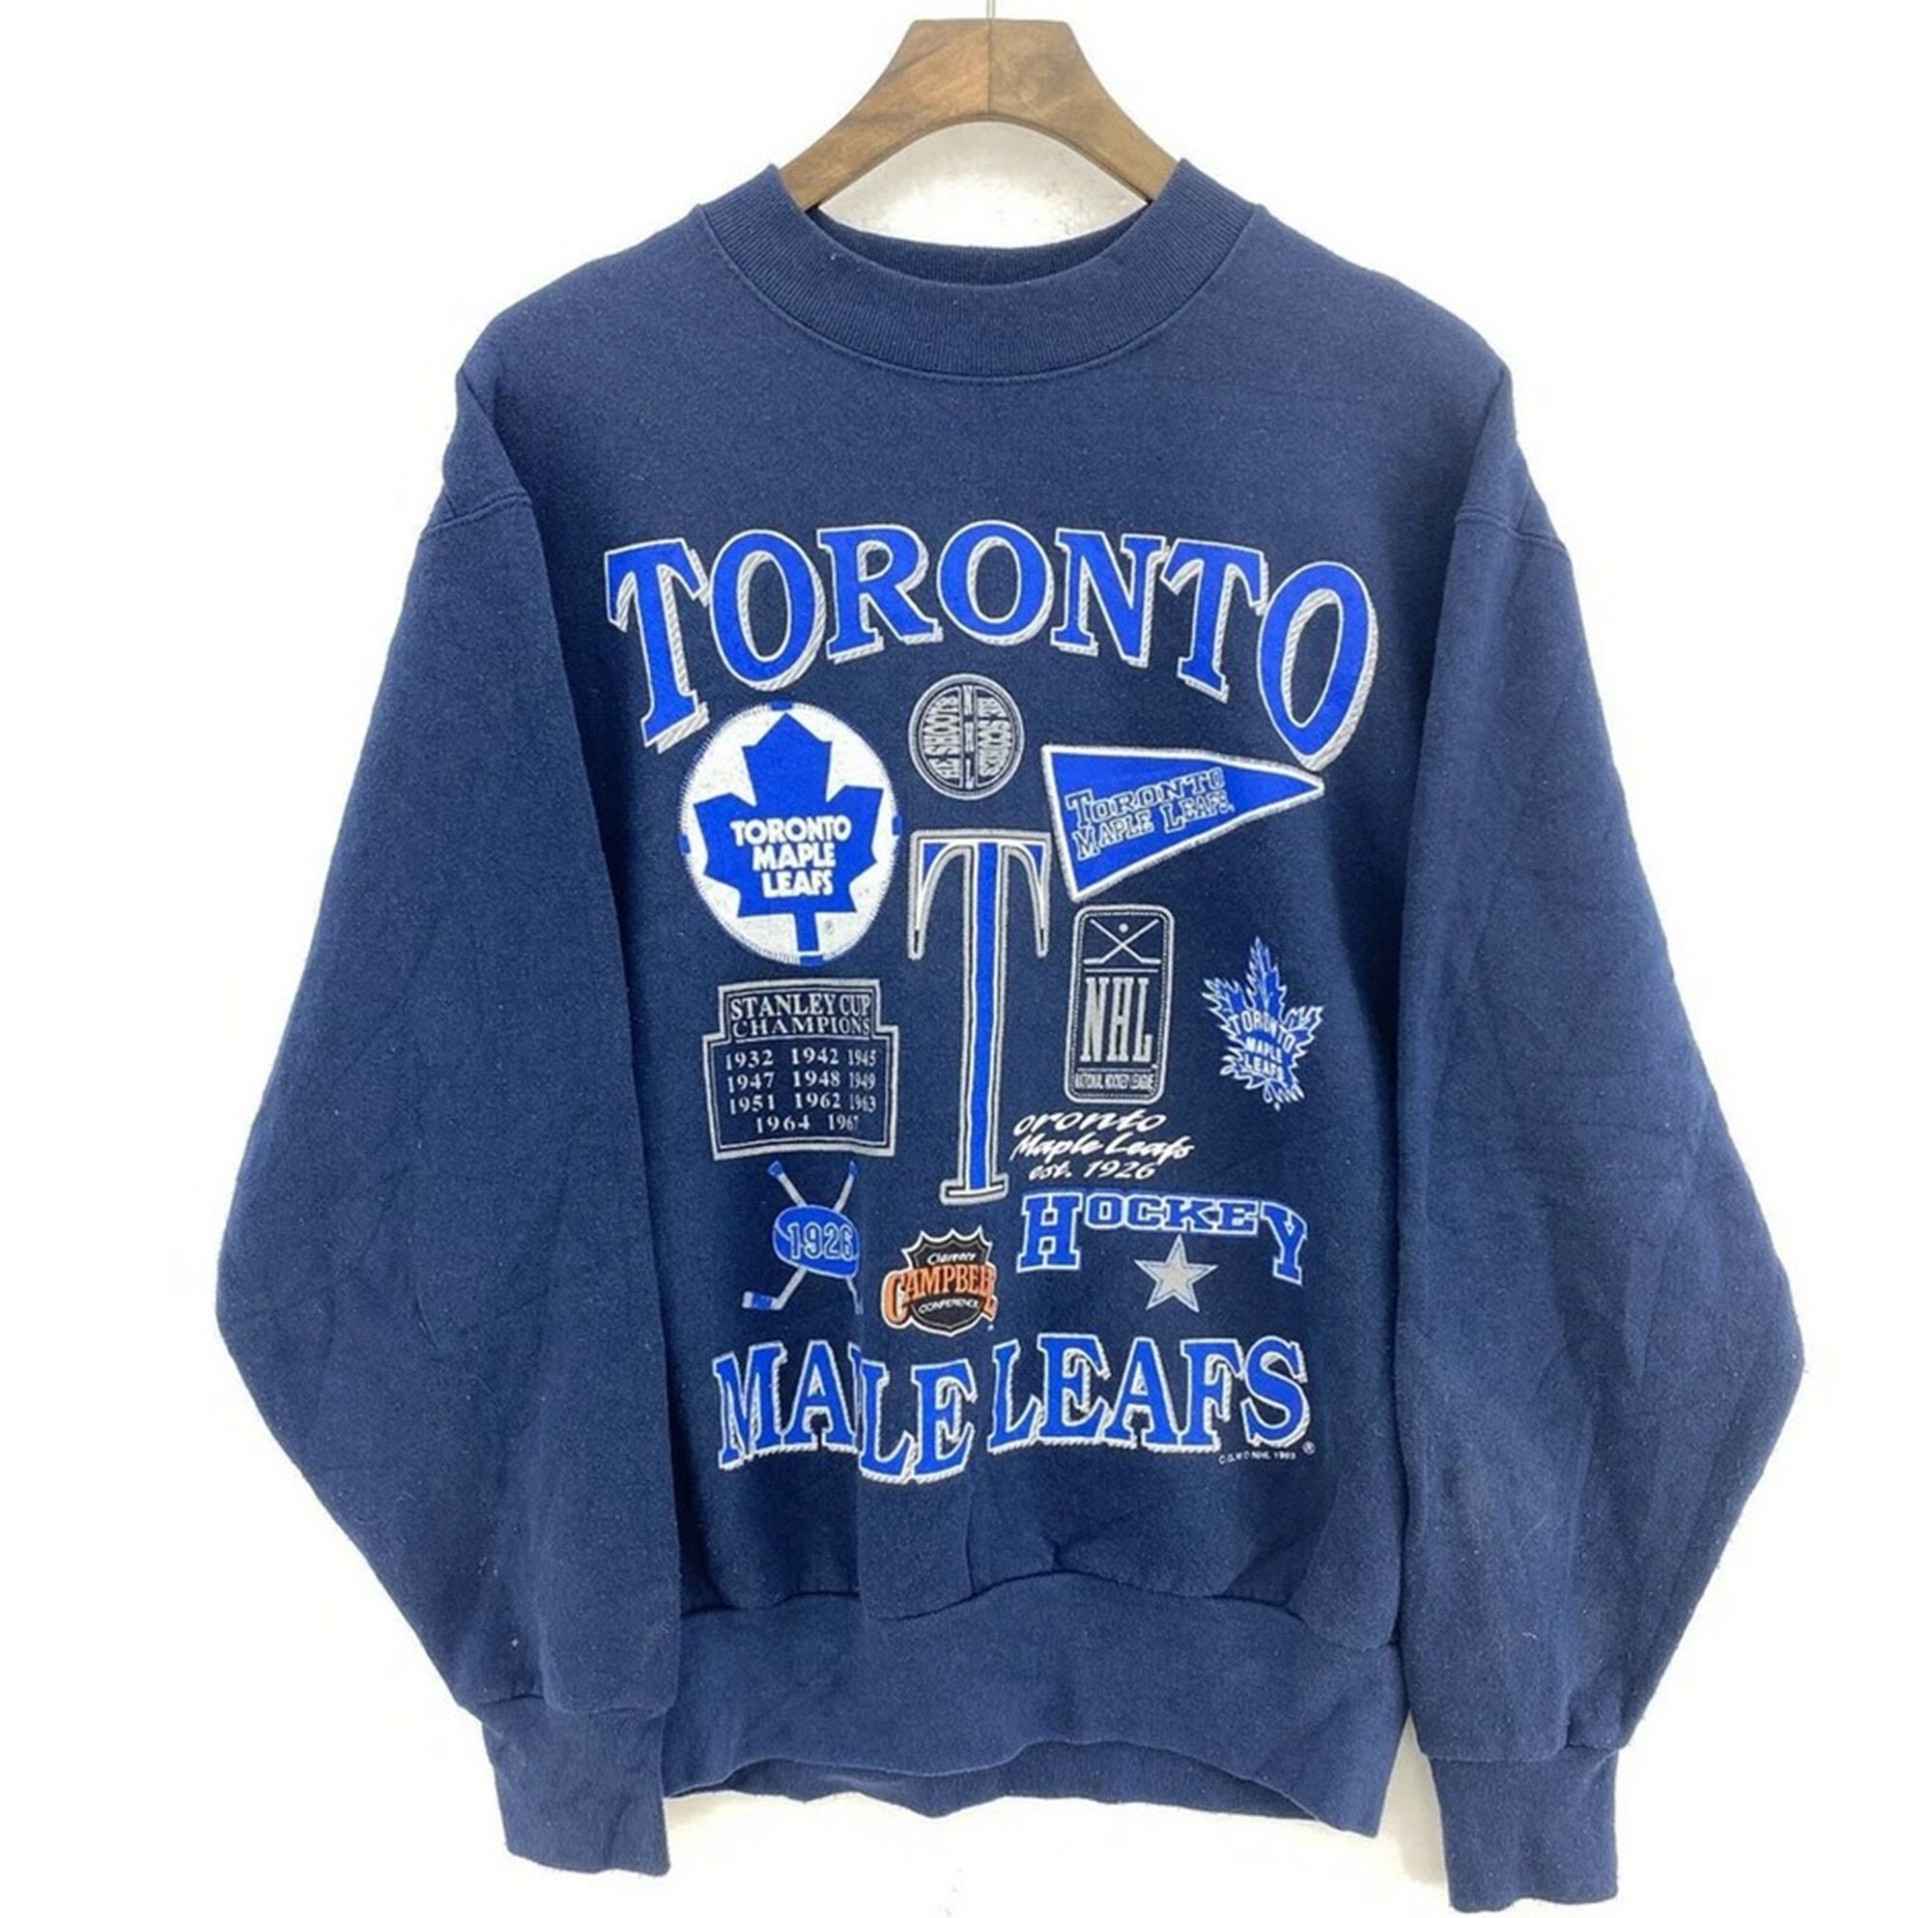 Vintage Toronto Maple Leafs Hoodie size XL (26x31) for $40 available now!  #whatsgoodvintage